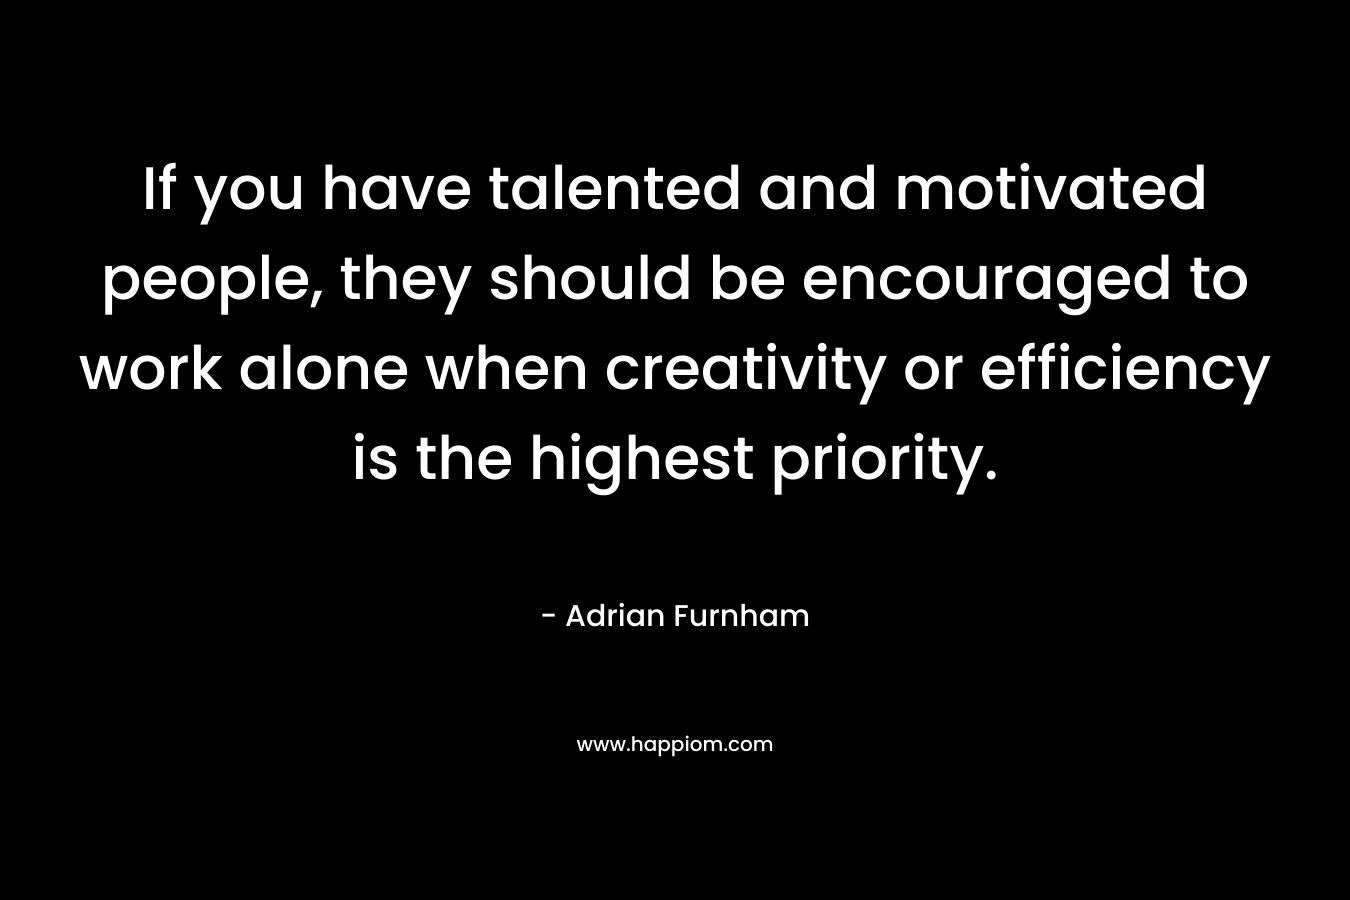 If you have talented and motivated people, they should be encouraged to work alone when creativity or efficiency is the highest priority. – Adrian Furnham